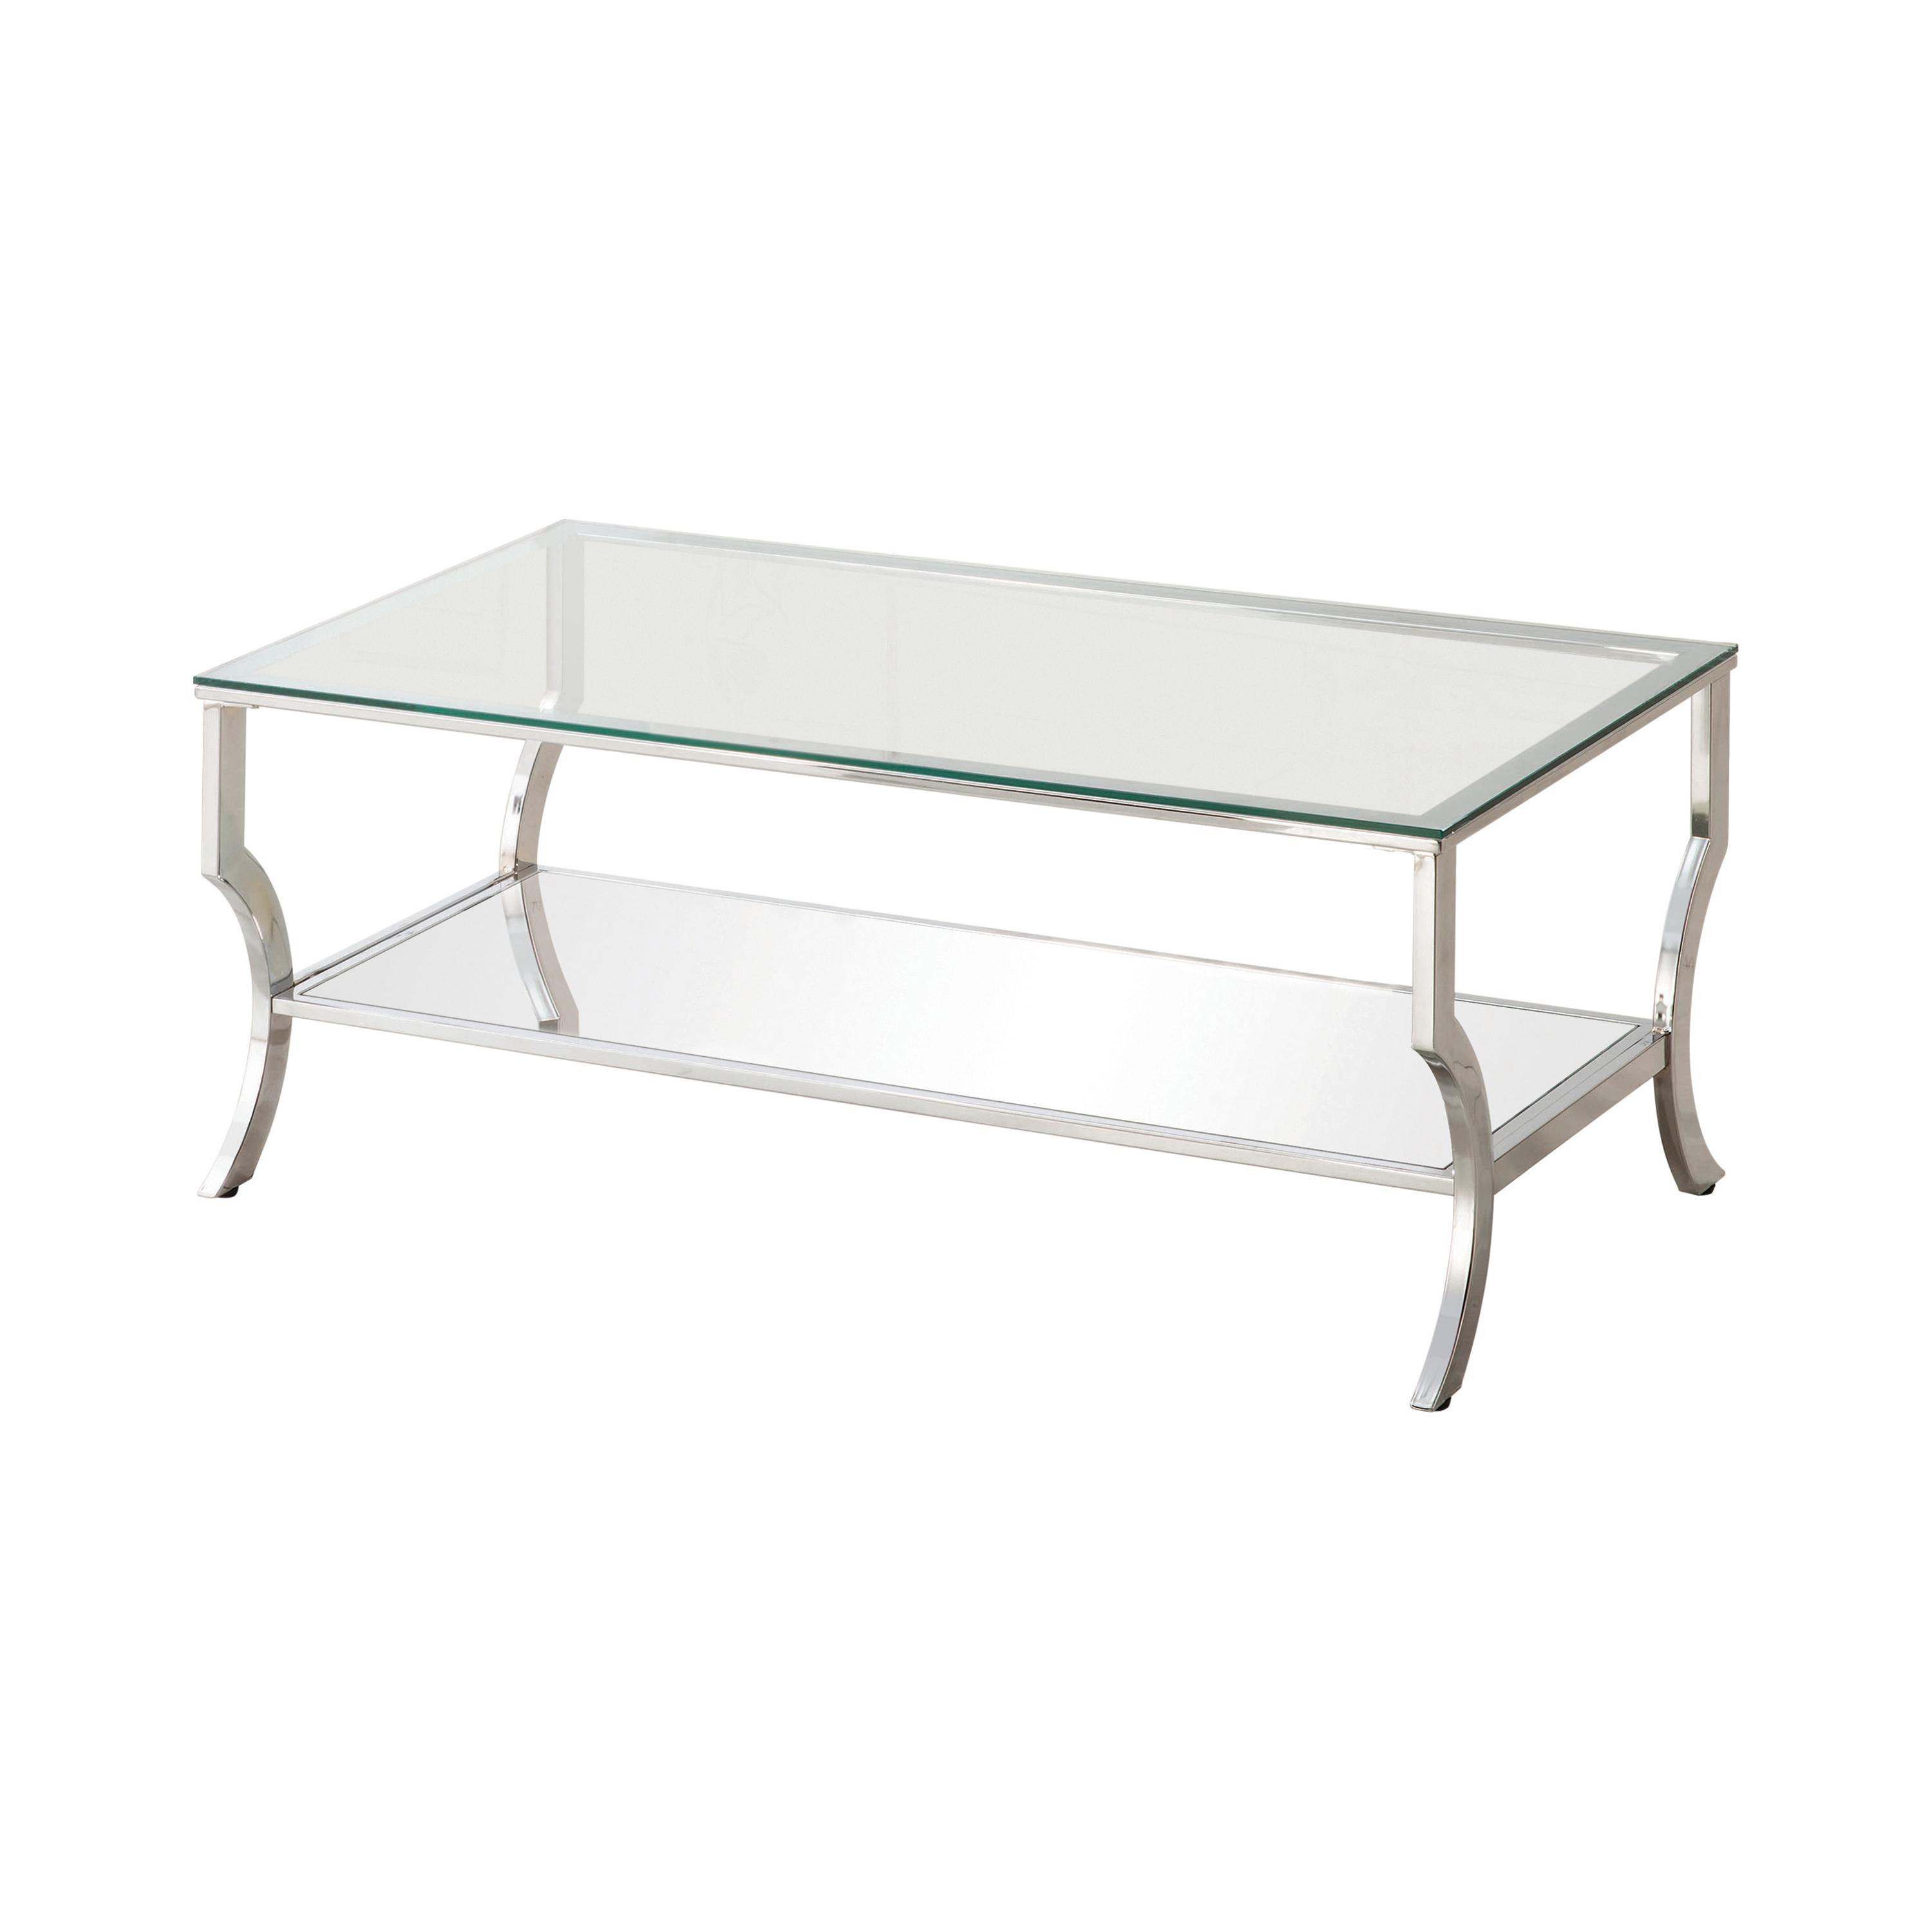 Contemporary Coffee Table 720338 720338 in Chrome 